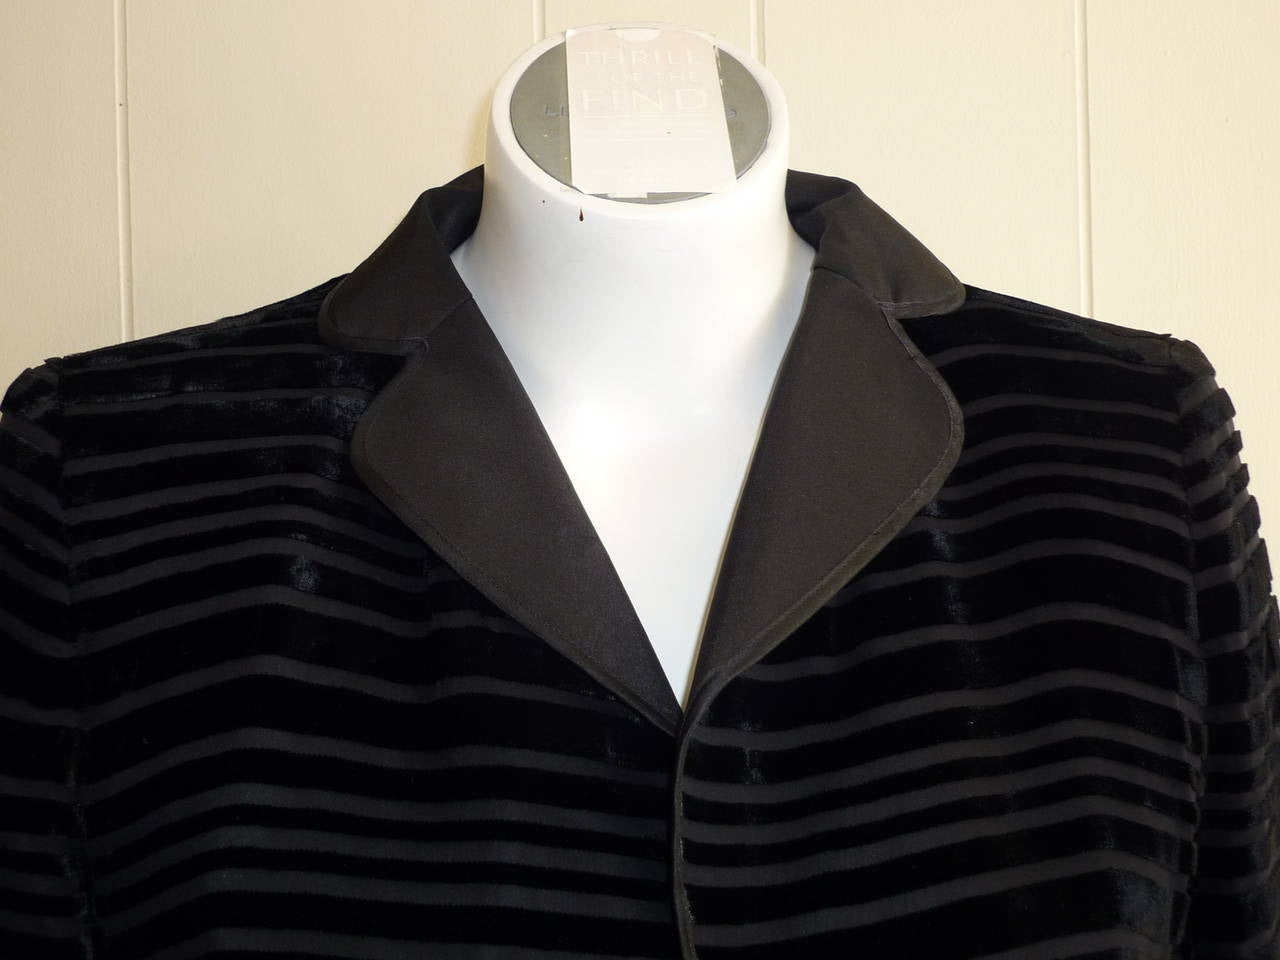 Horizontal ribbed velvet with a black chiffon base, this jacket sports a notched lapel and french cuffs. Closure is by way of a single button. The materials re 77% viscose 23% silk.